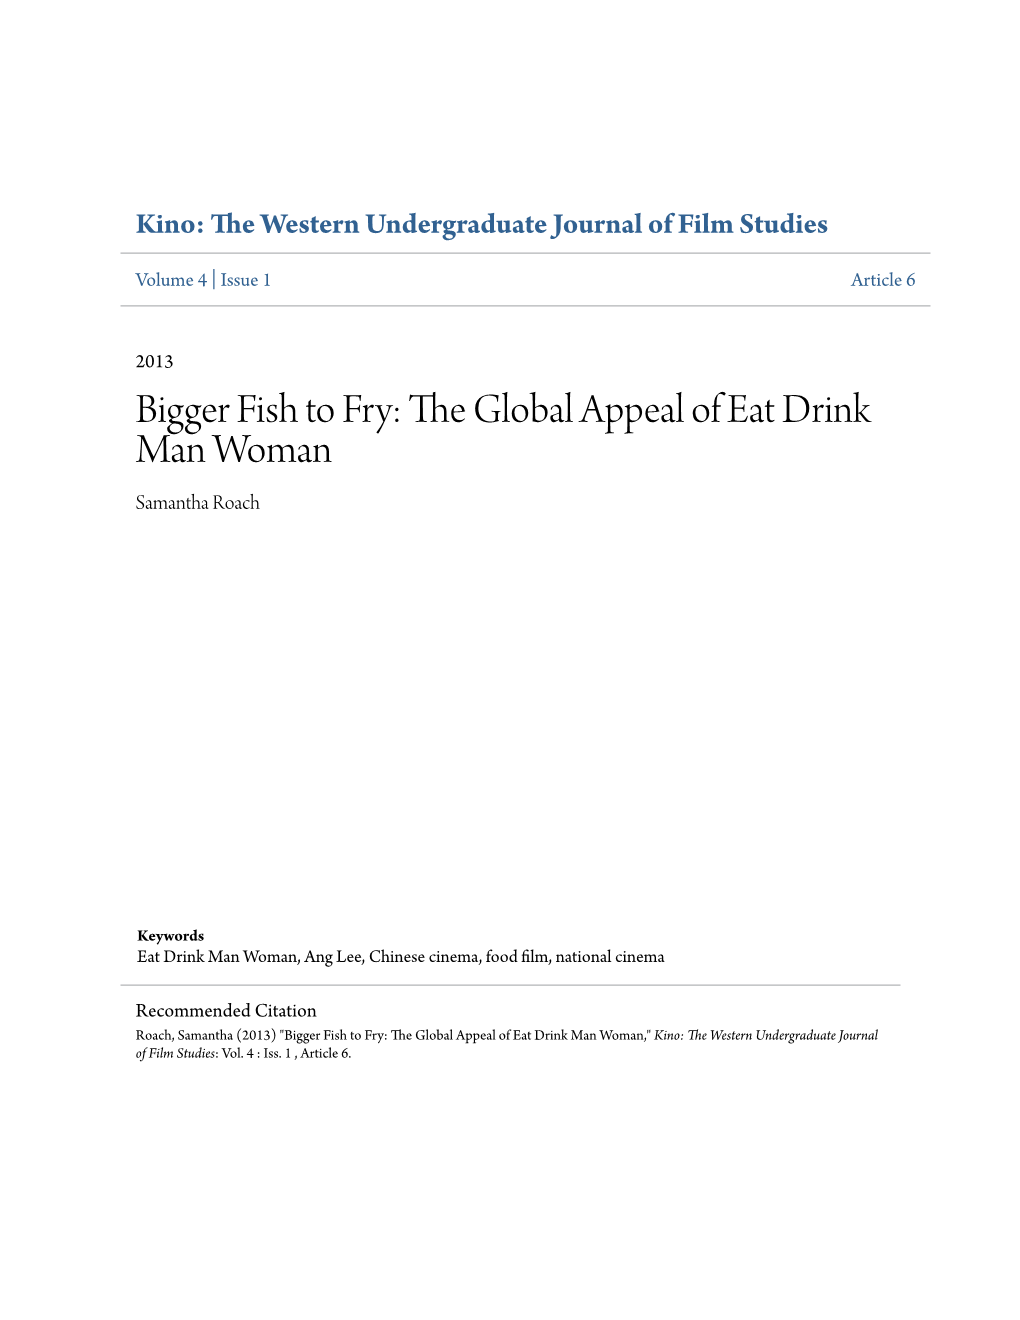 The Global Appeal of Eat Drink Man Woman Samantha Roach